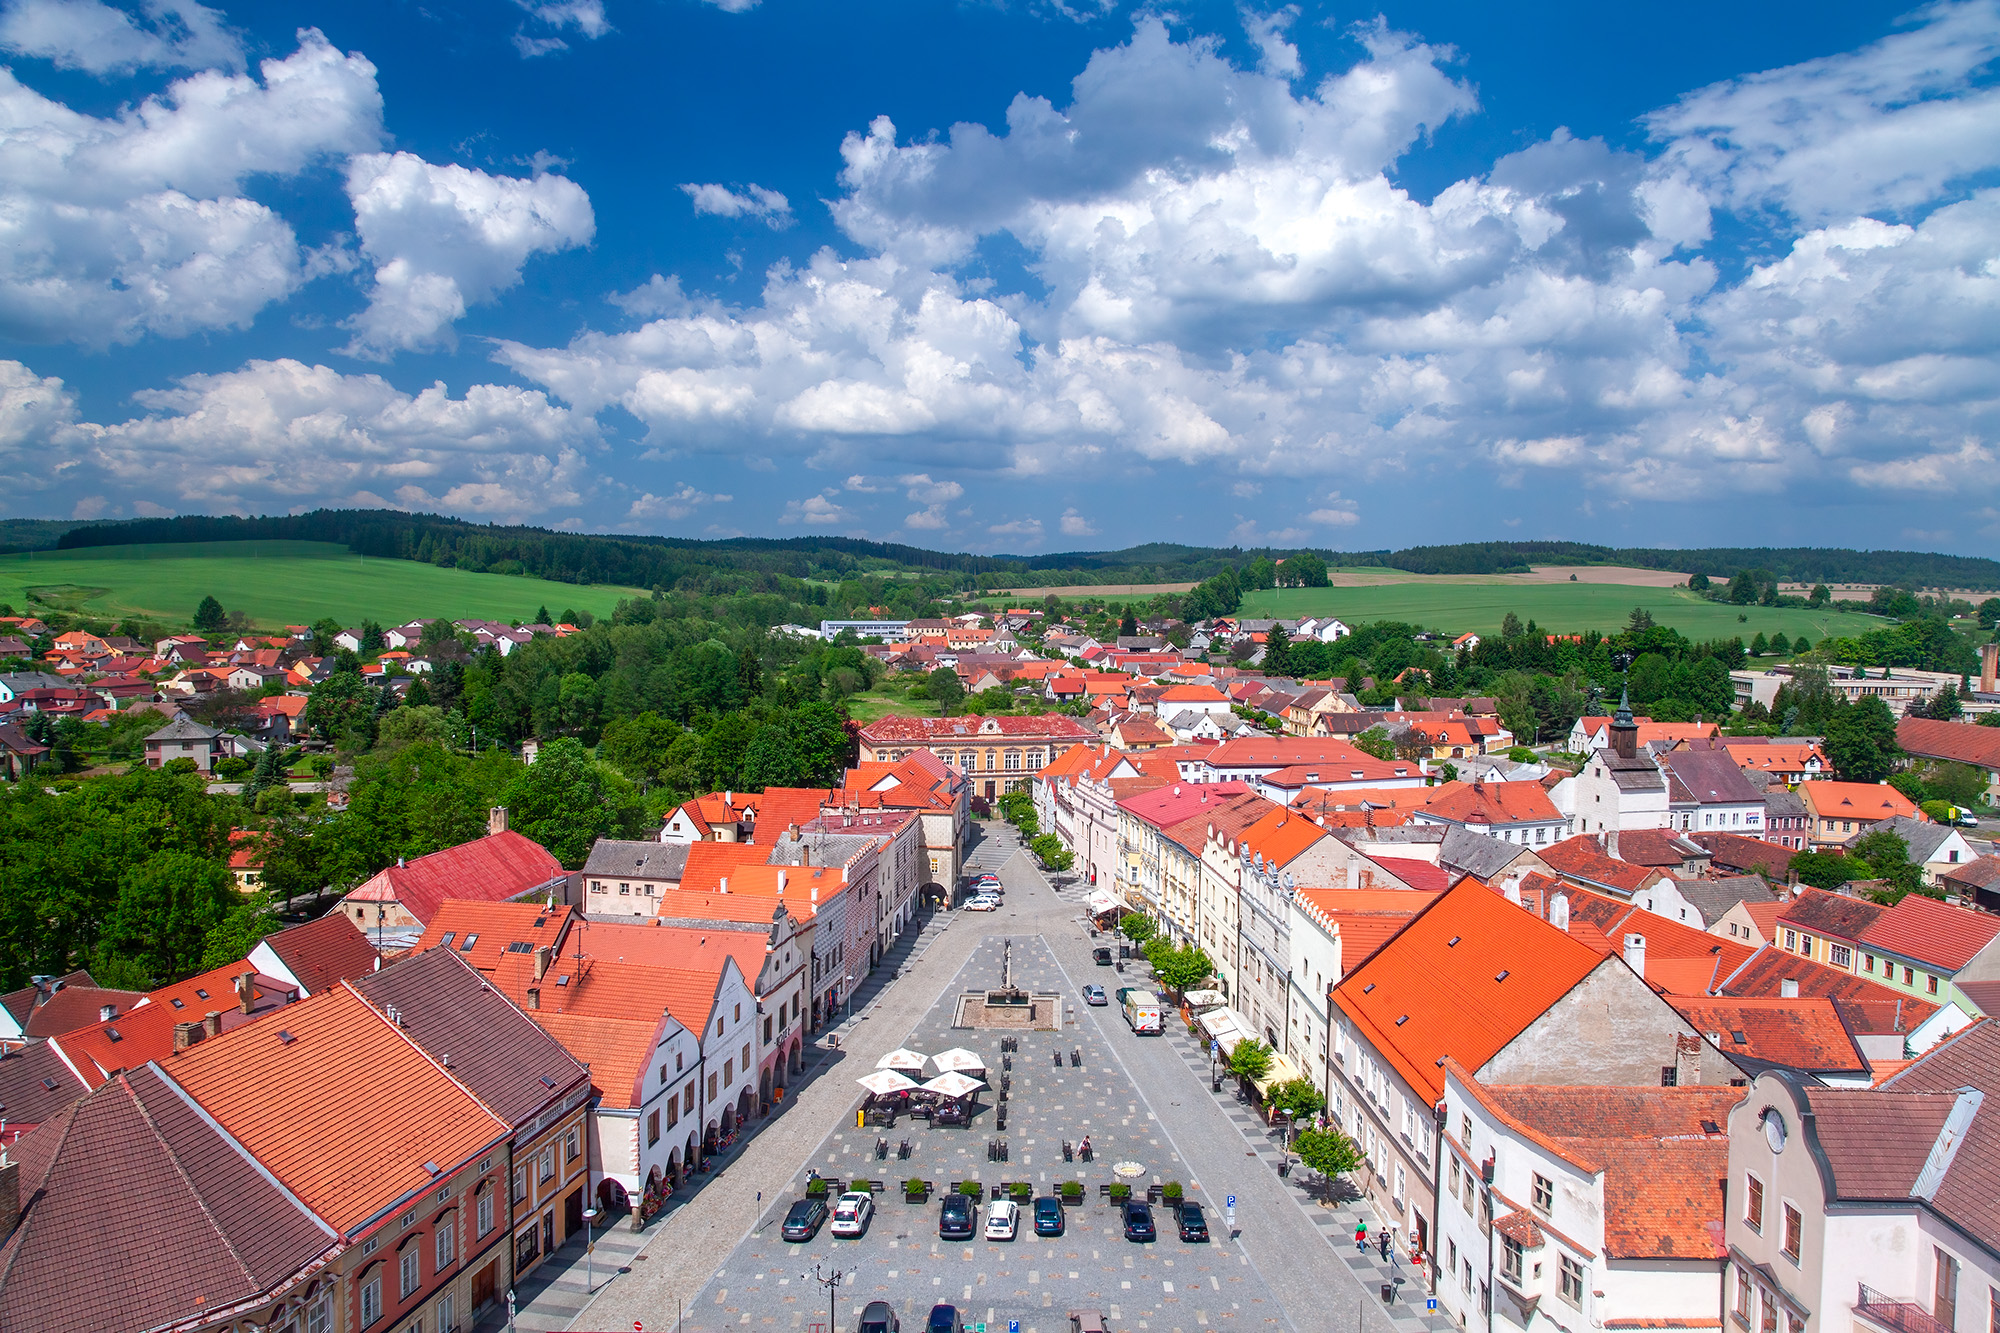 Captured from the vantage point of a church tower in Slavonice, Czech Republic, this image beautifully divides the quaint town...